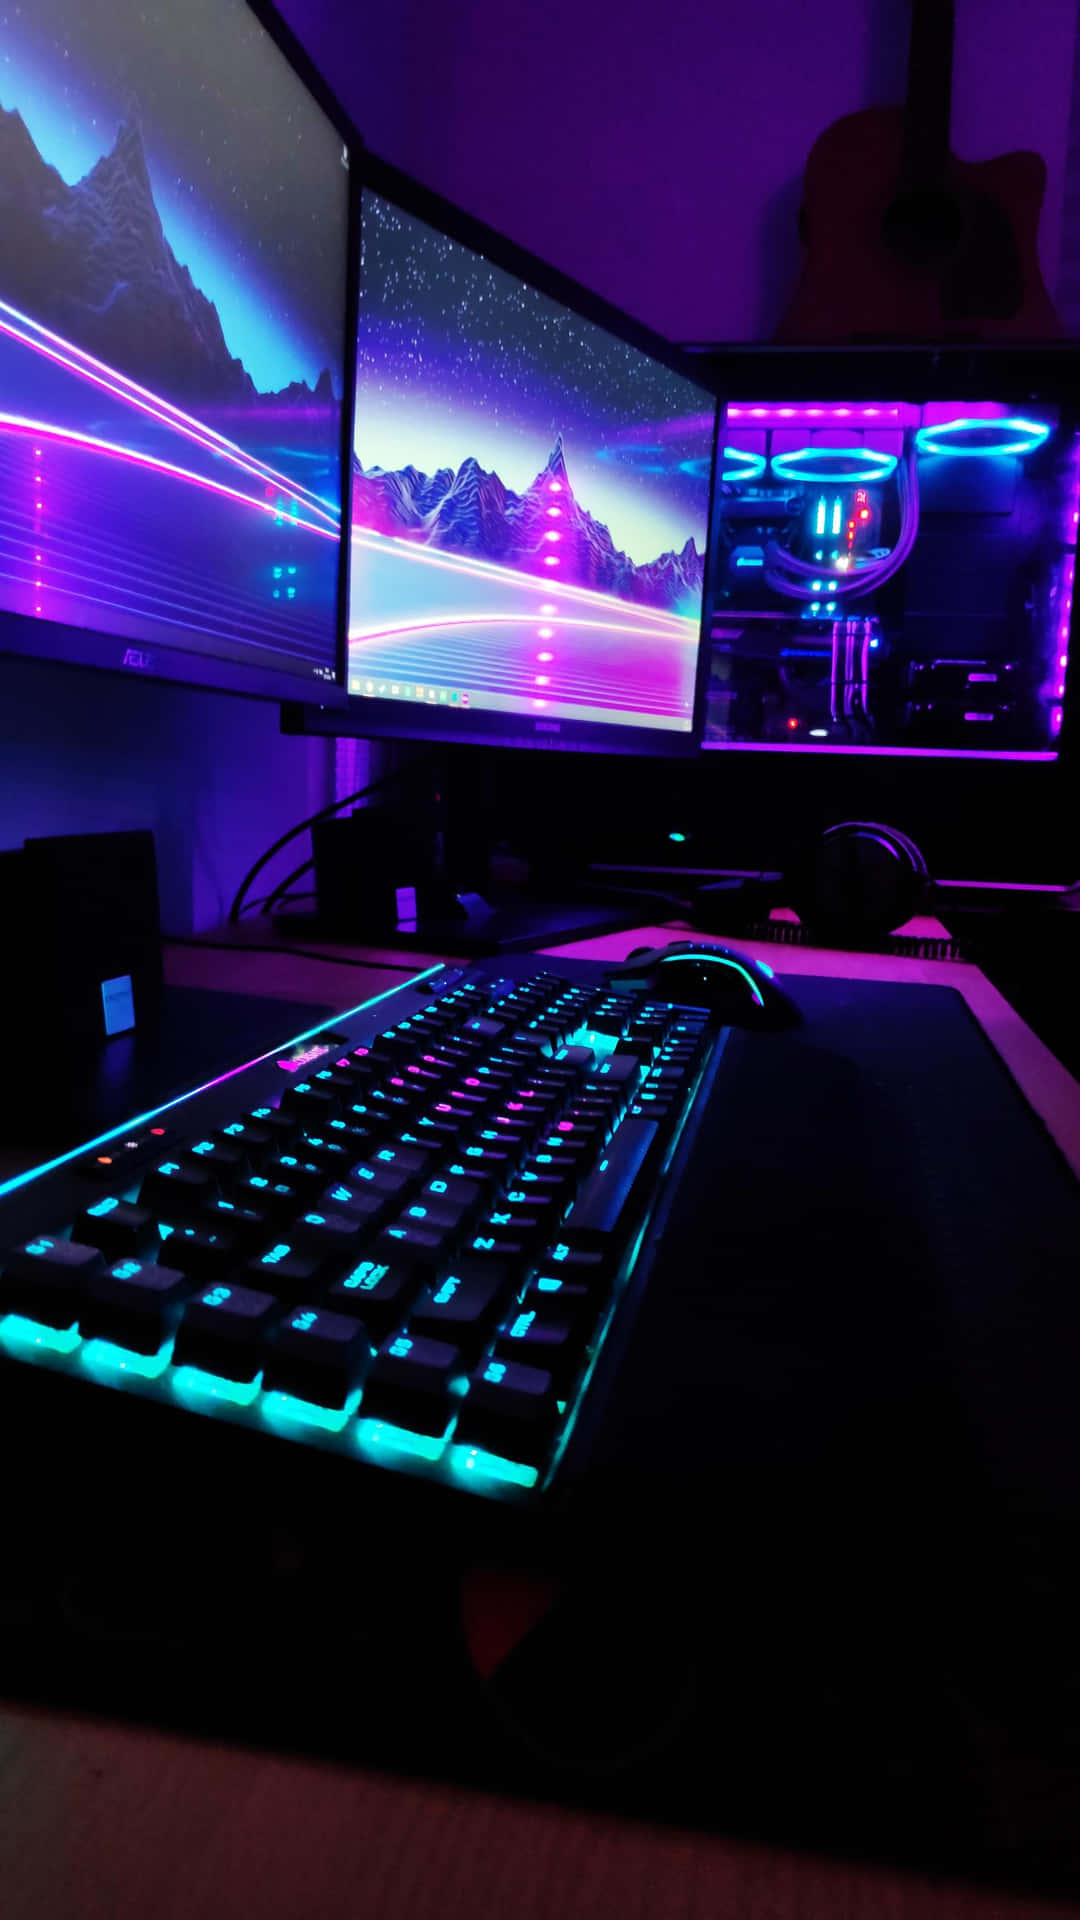 Fire Up Your Gaming Set-Up with the Best Gaming Accessories Wallpaper